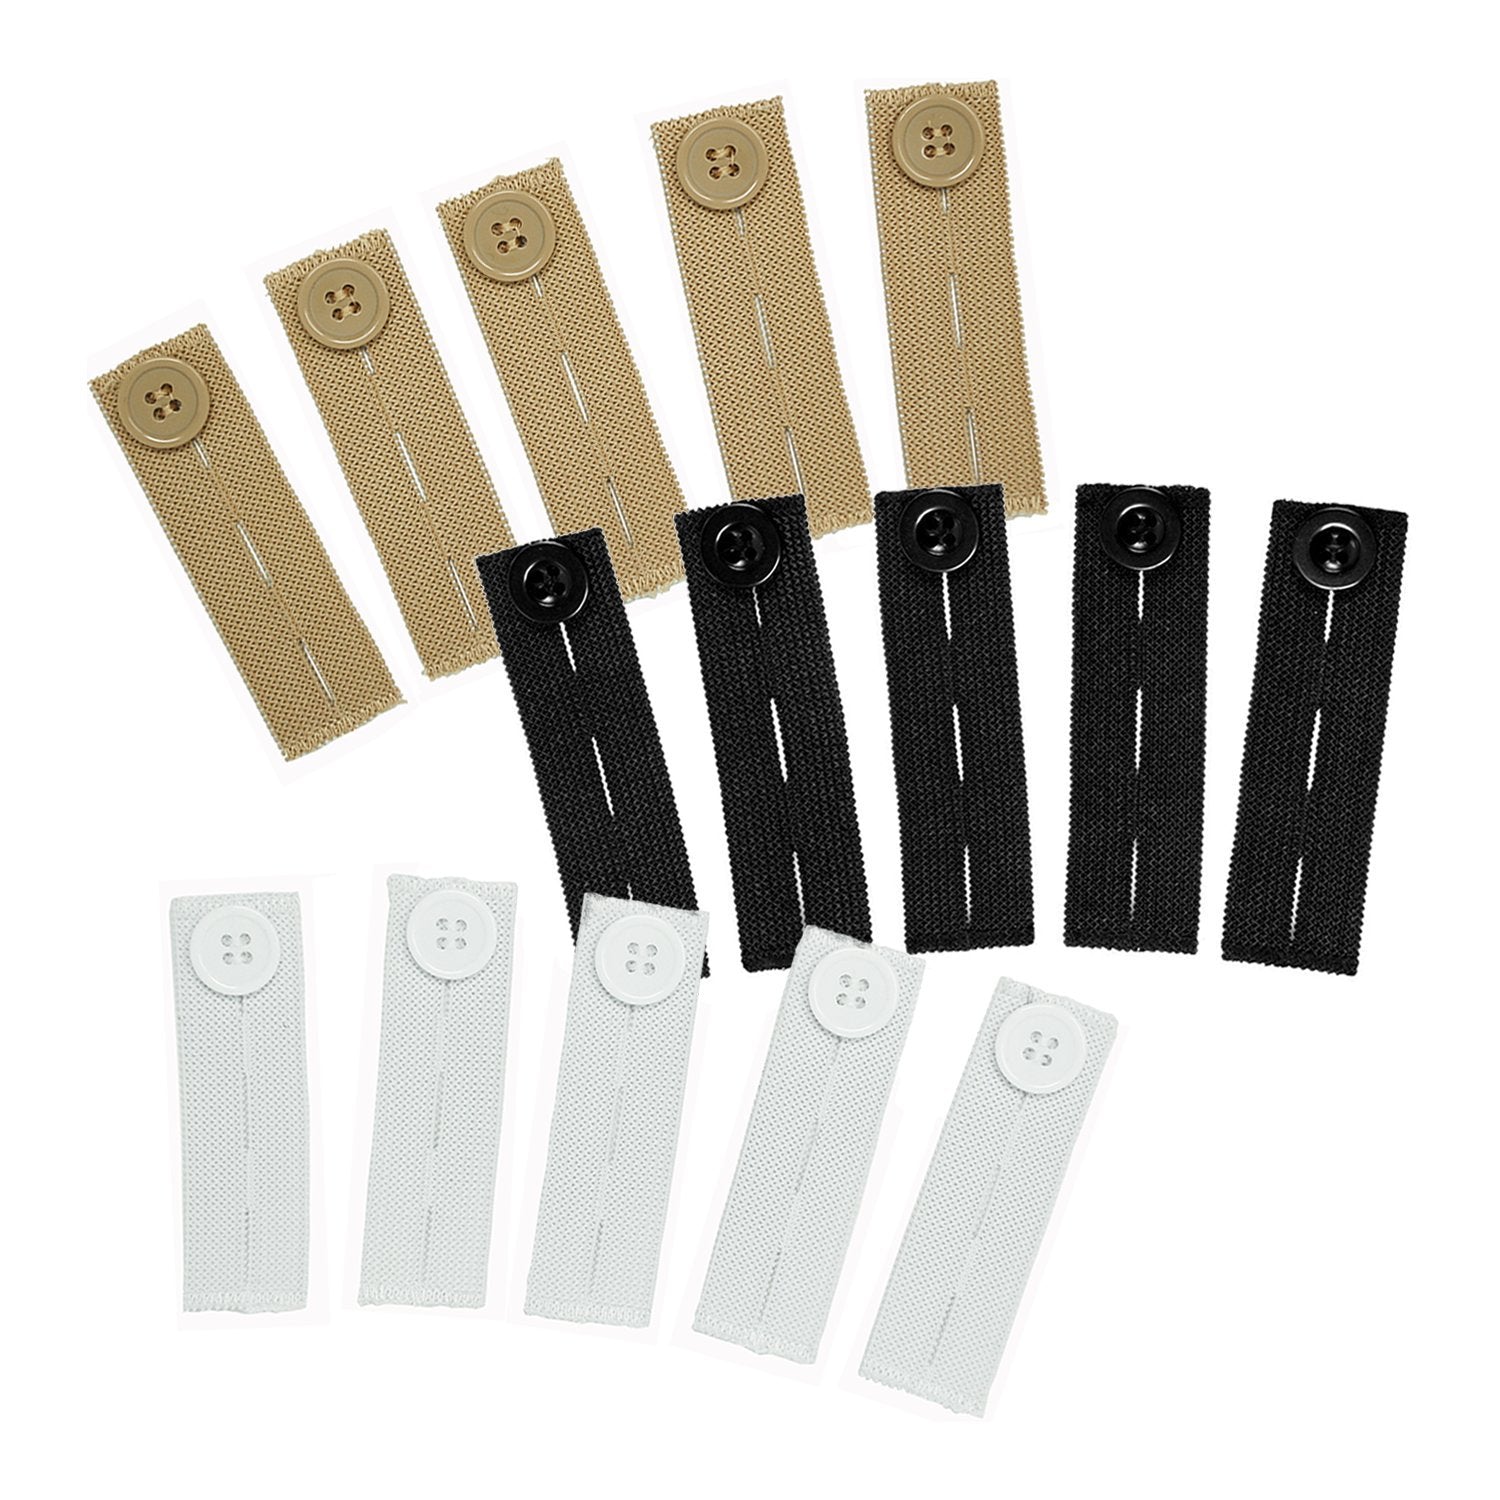 Buy Elastic Pants Waist Extender 5-Pack - Strong Adjustable Pant Button  Extenders by Comfy Clothiers at